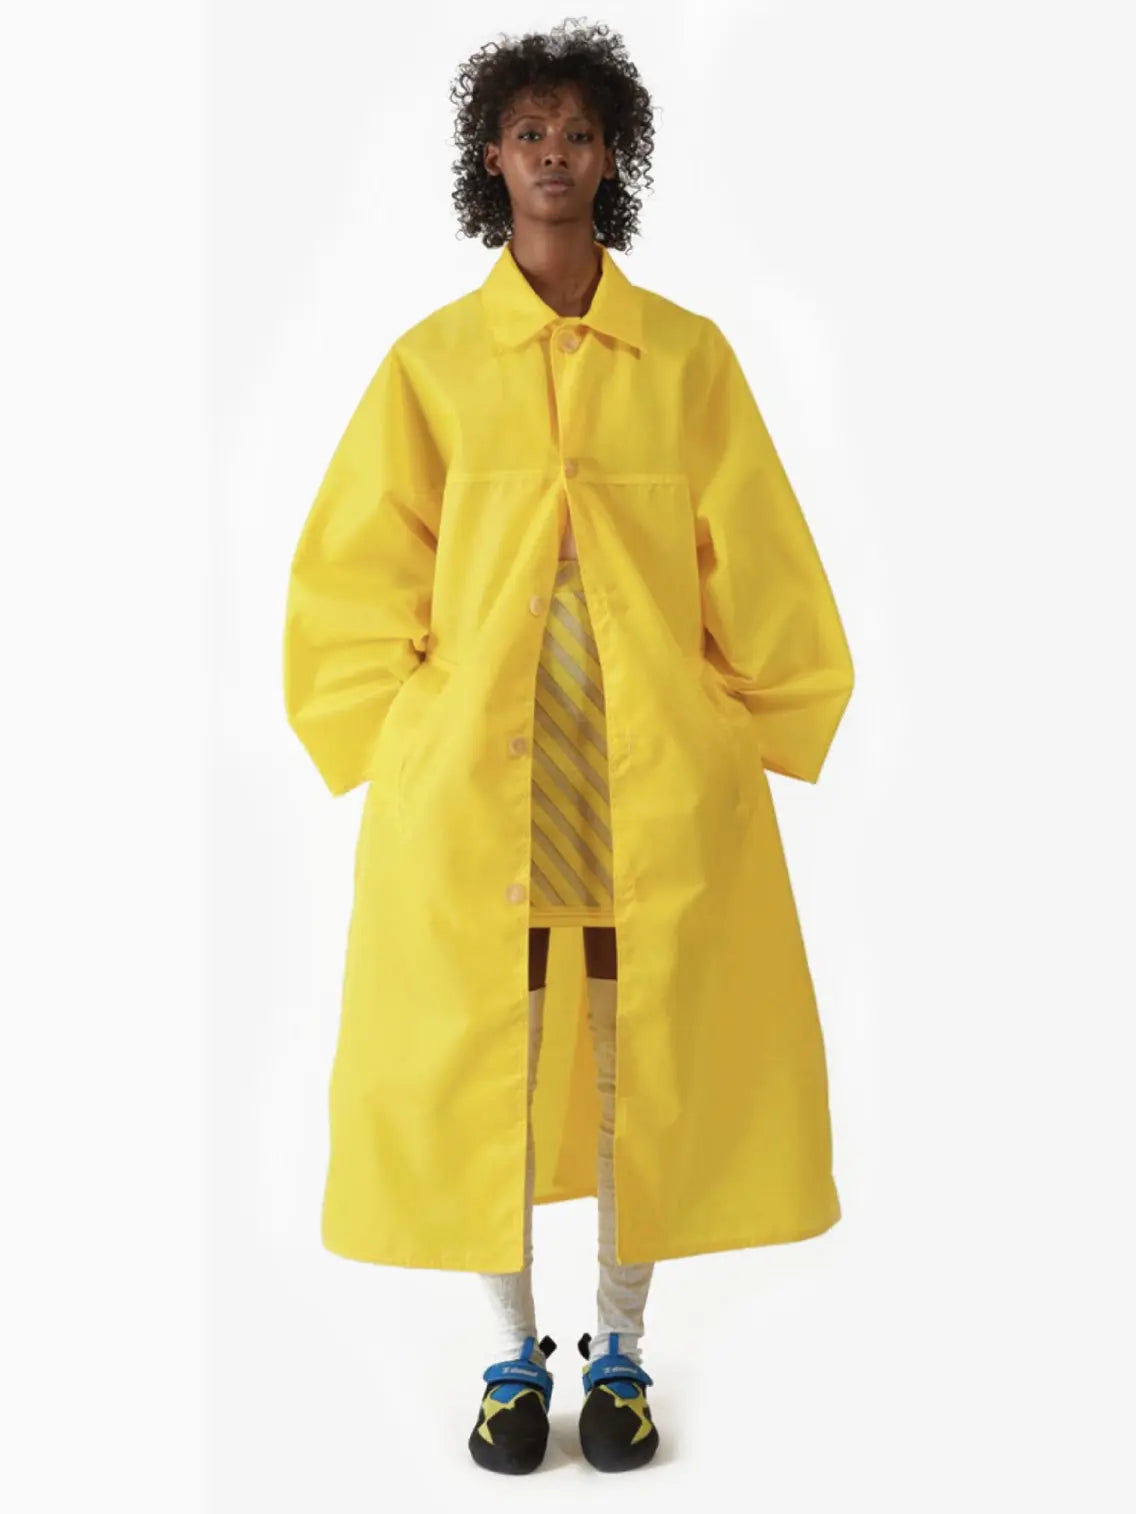 A person with short, curly hair is wearing a long, oversized Kim Long Coat Yellow by Bielo that reaches below the knees. They are standing against a plain white background, with hands in the coat pockets, revealing a hint of a striped outfit underneath—perfectly suited for strolling through Barcelona or visiting Bassalstore.